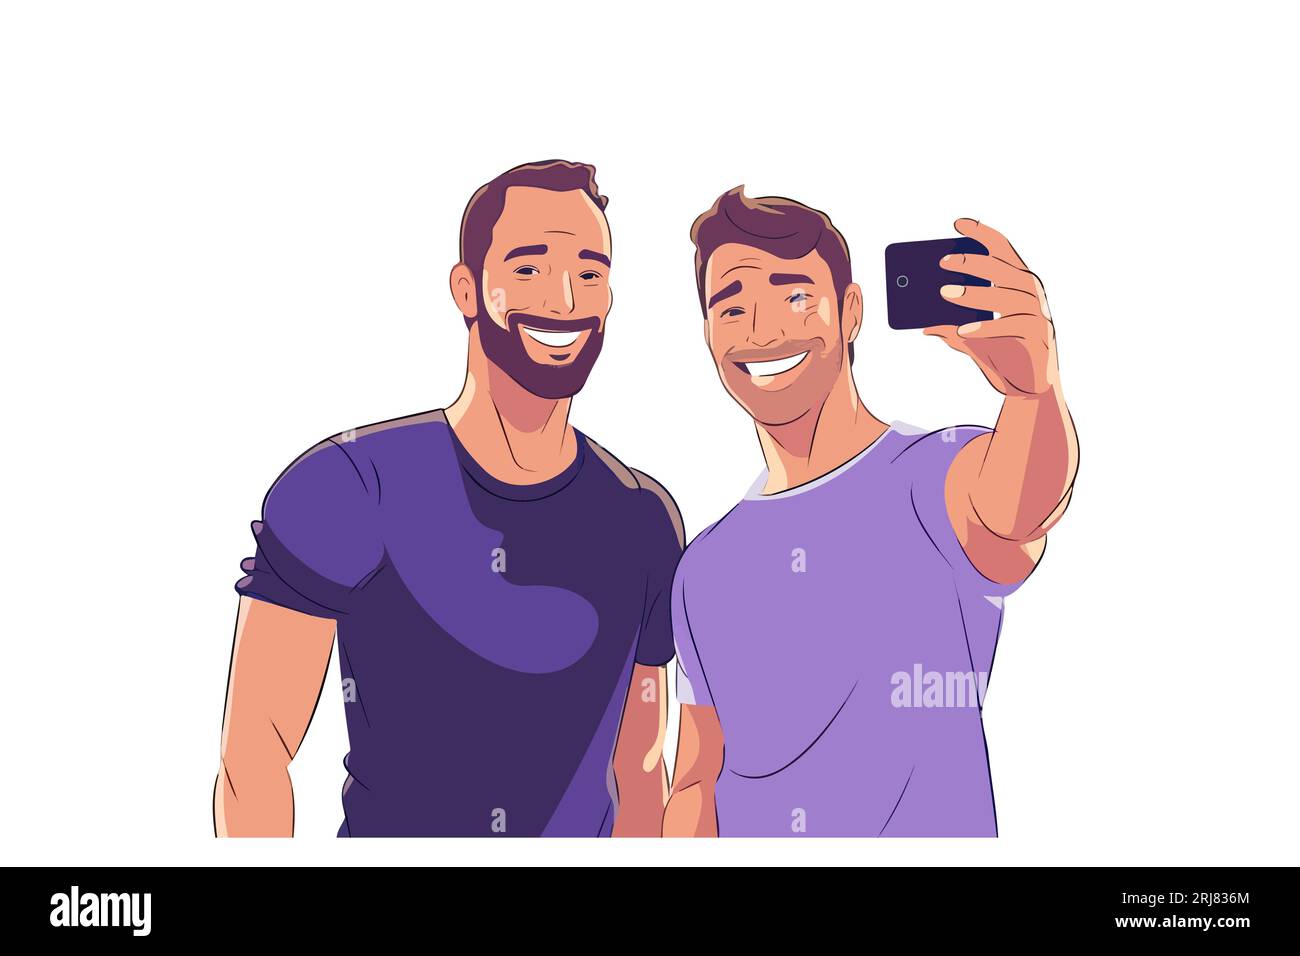 Cartoon-style close-up illustration of a couple taking a selfie ...